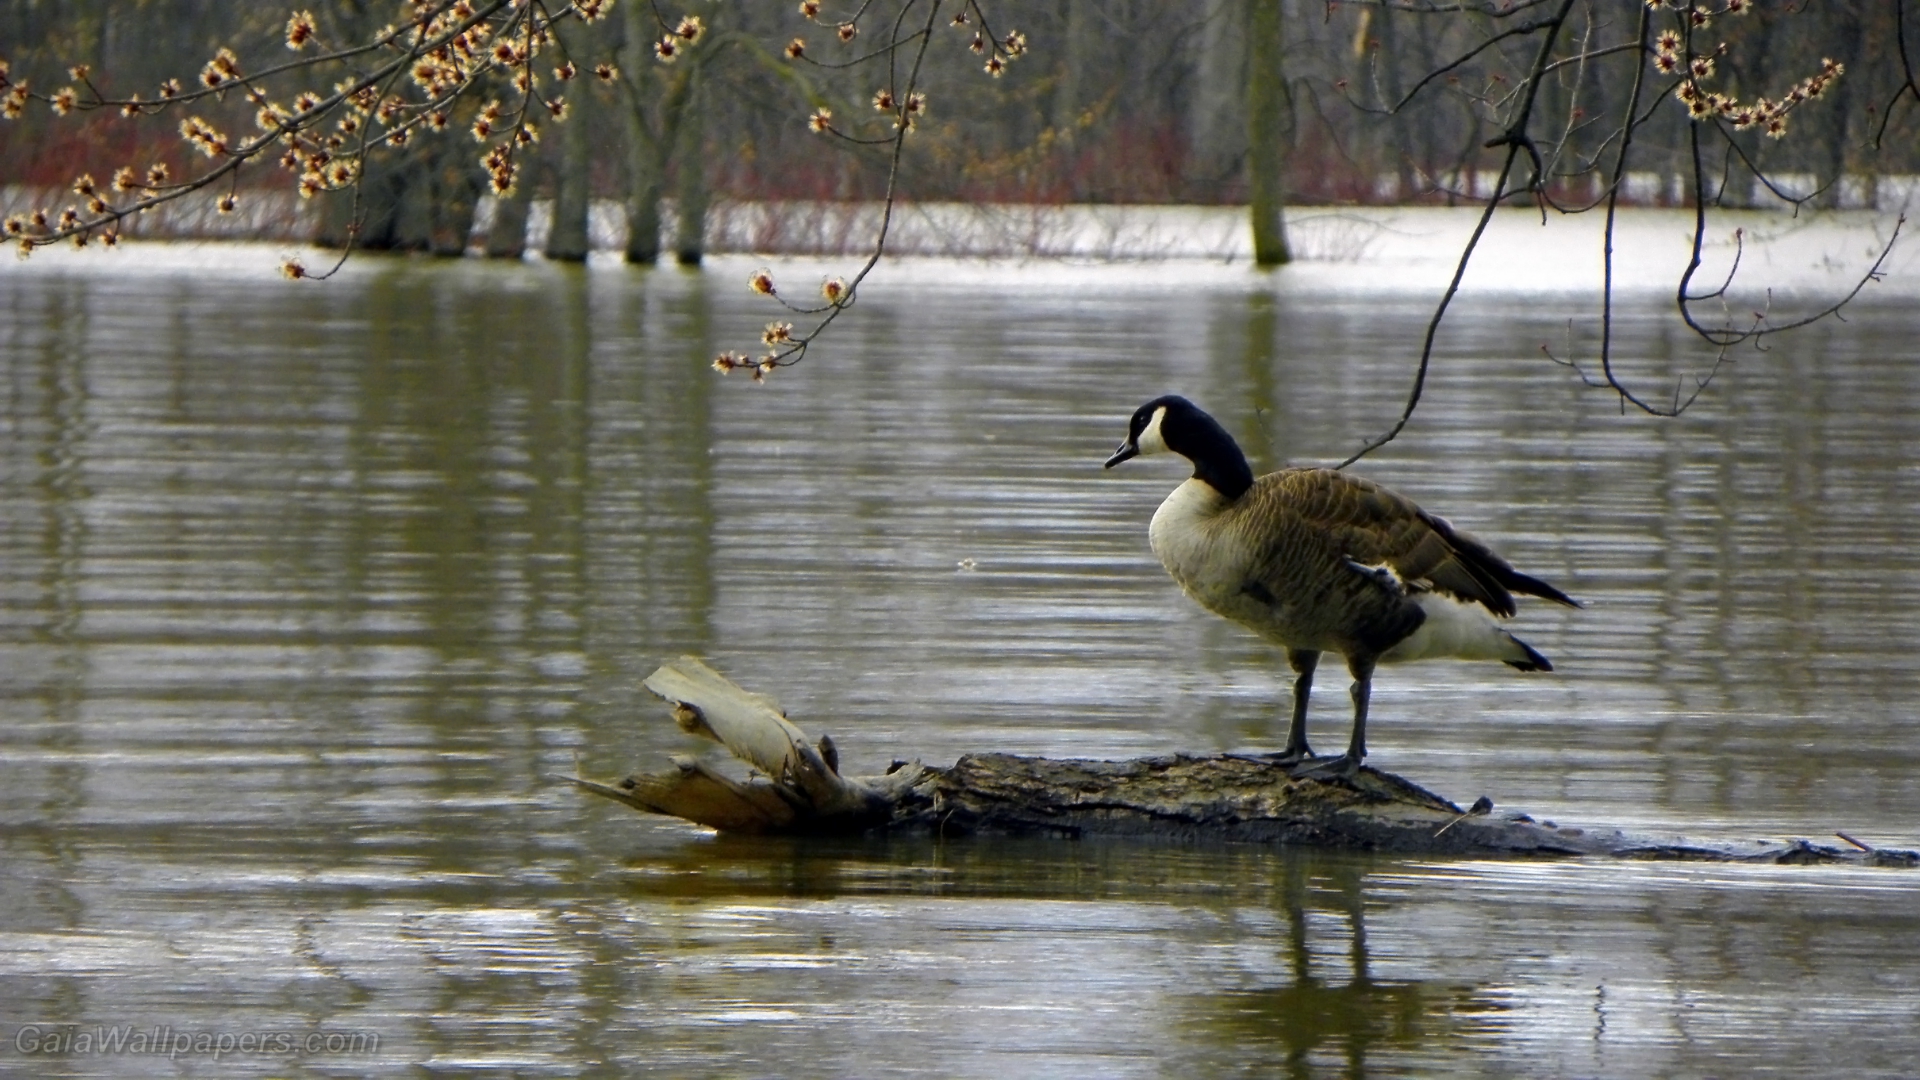 Canada Goose looking at high water during early spring wallpaper 1920x1080 Desktop Wallpaper